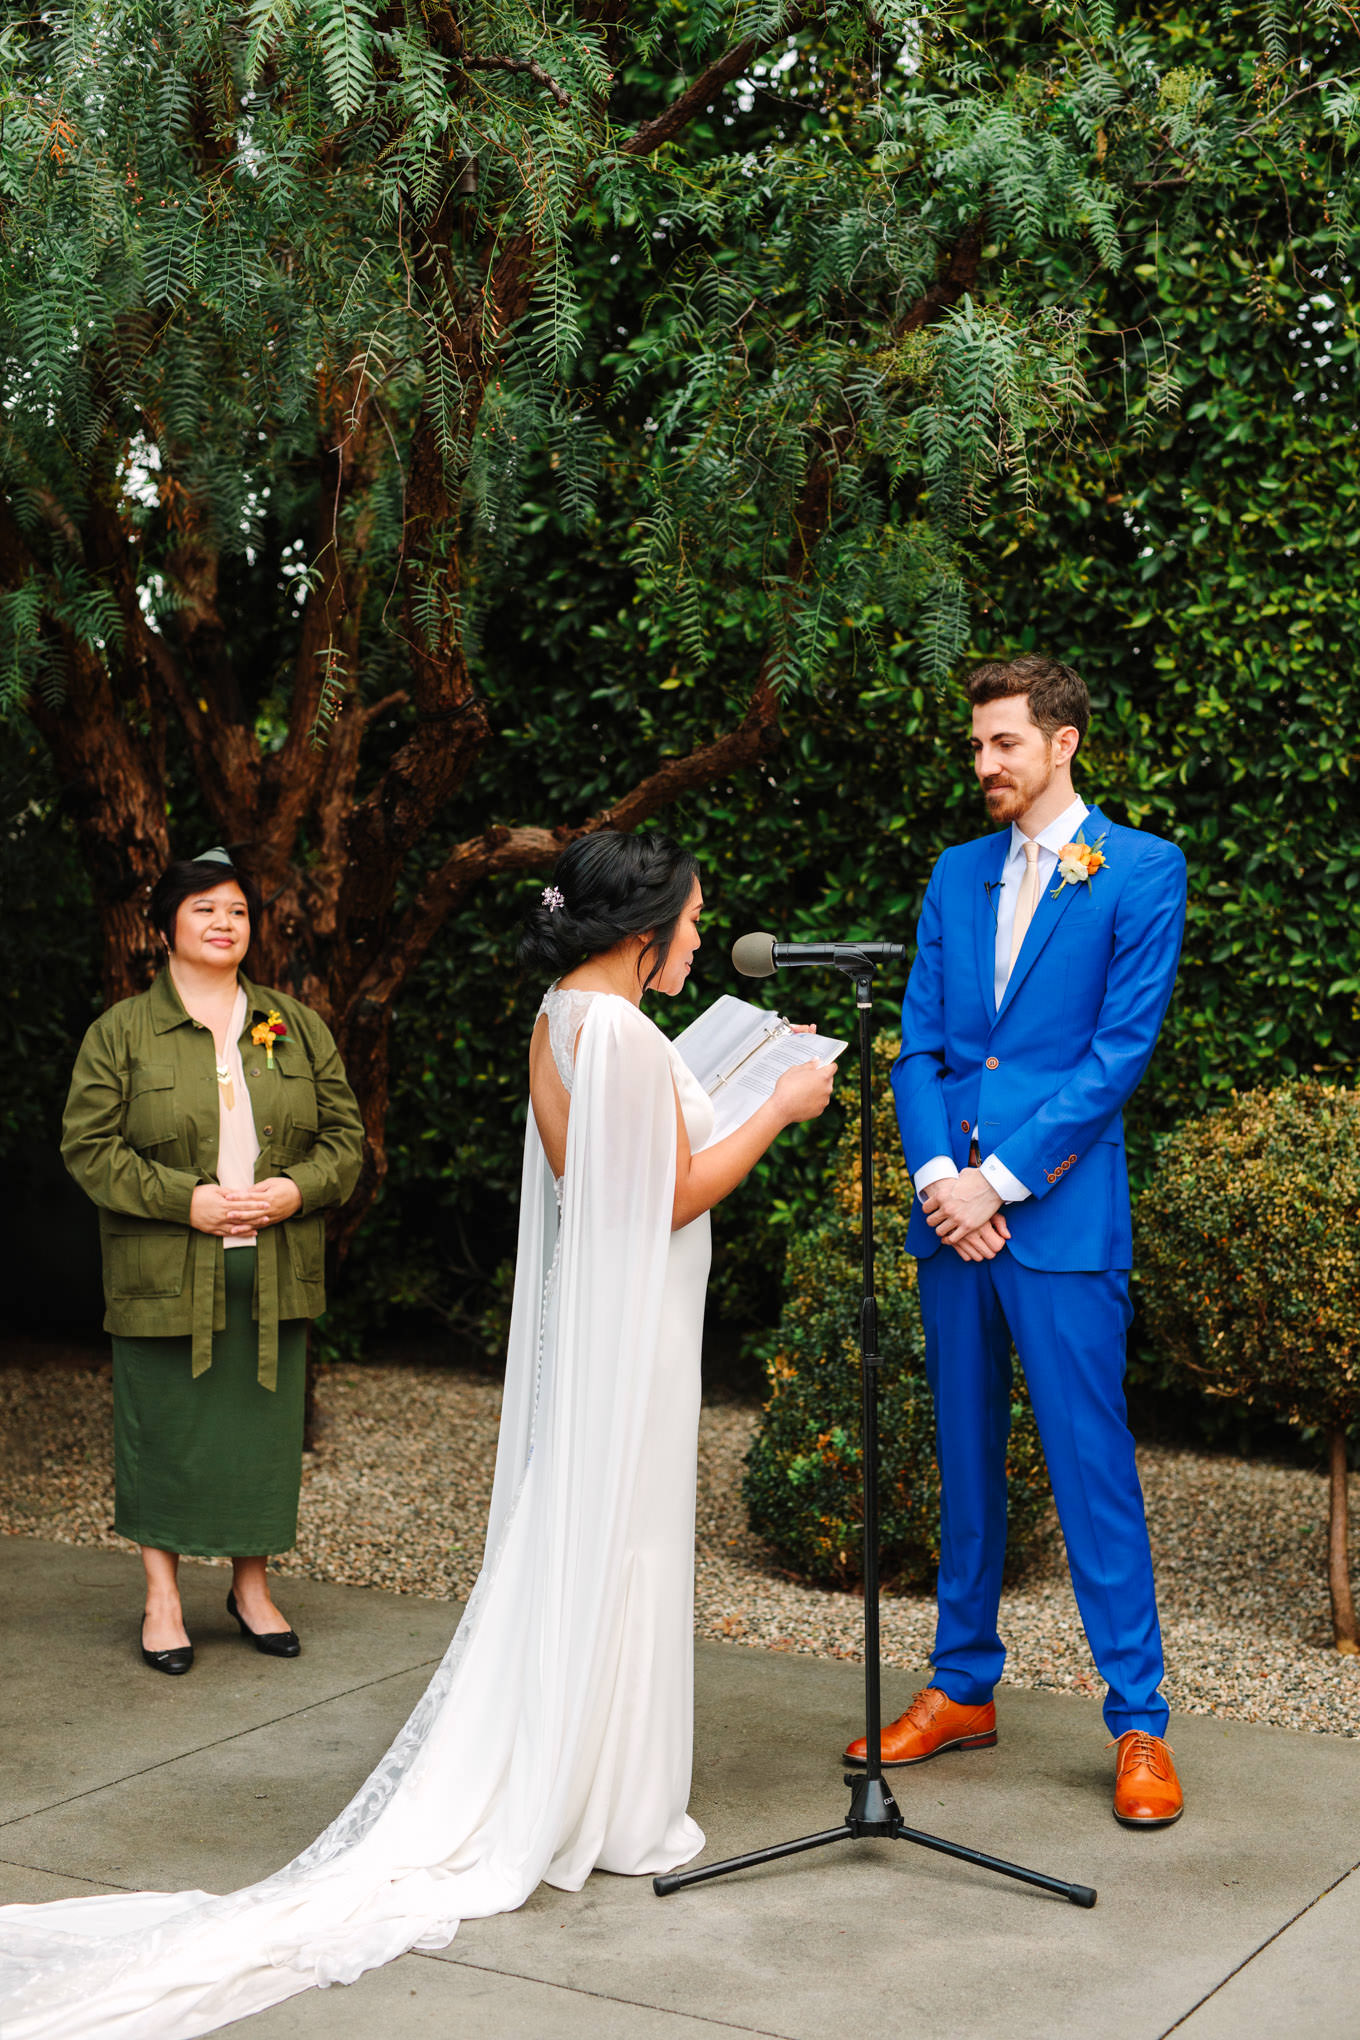 Vow exchange | TV inspired wedding at The Fig House Los Angeles | Published on The Knot | Fresh and colorful photography for fun-loving couples in Southern California | #losangeleswedding #TVwedding #colorfulwedding #theknot   Source: Mary Costa Photography | Los Angeles wedding photographer